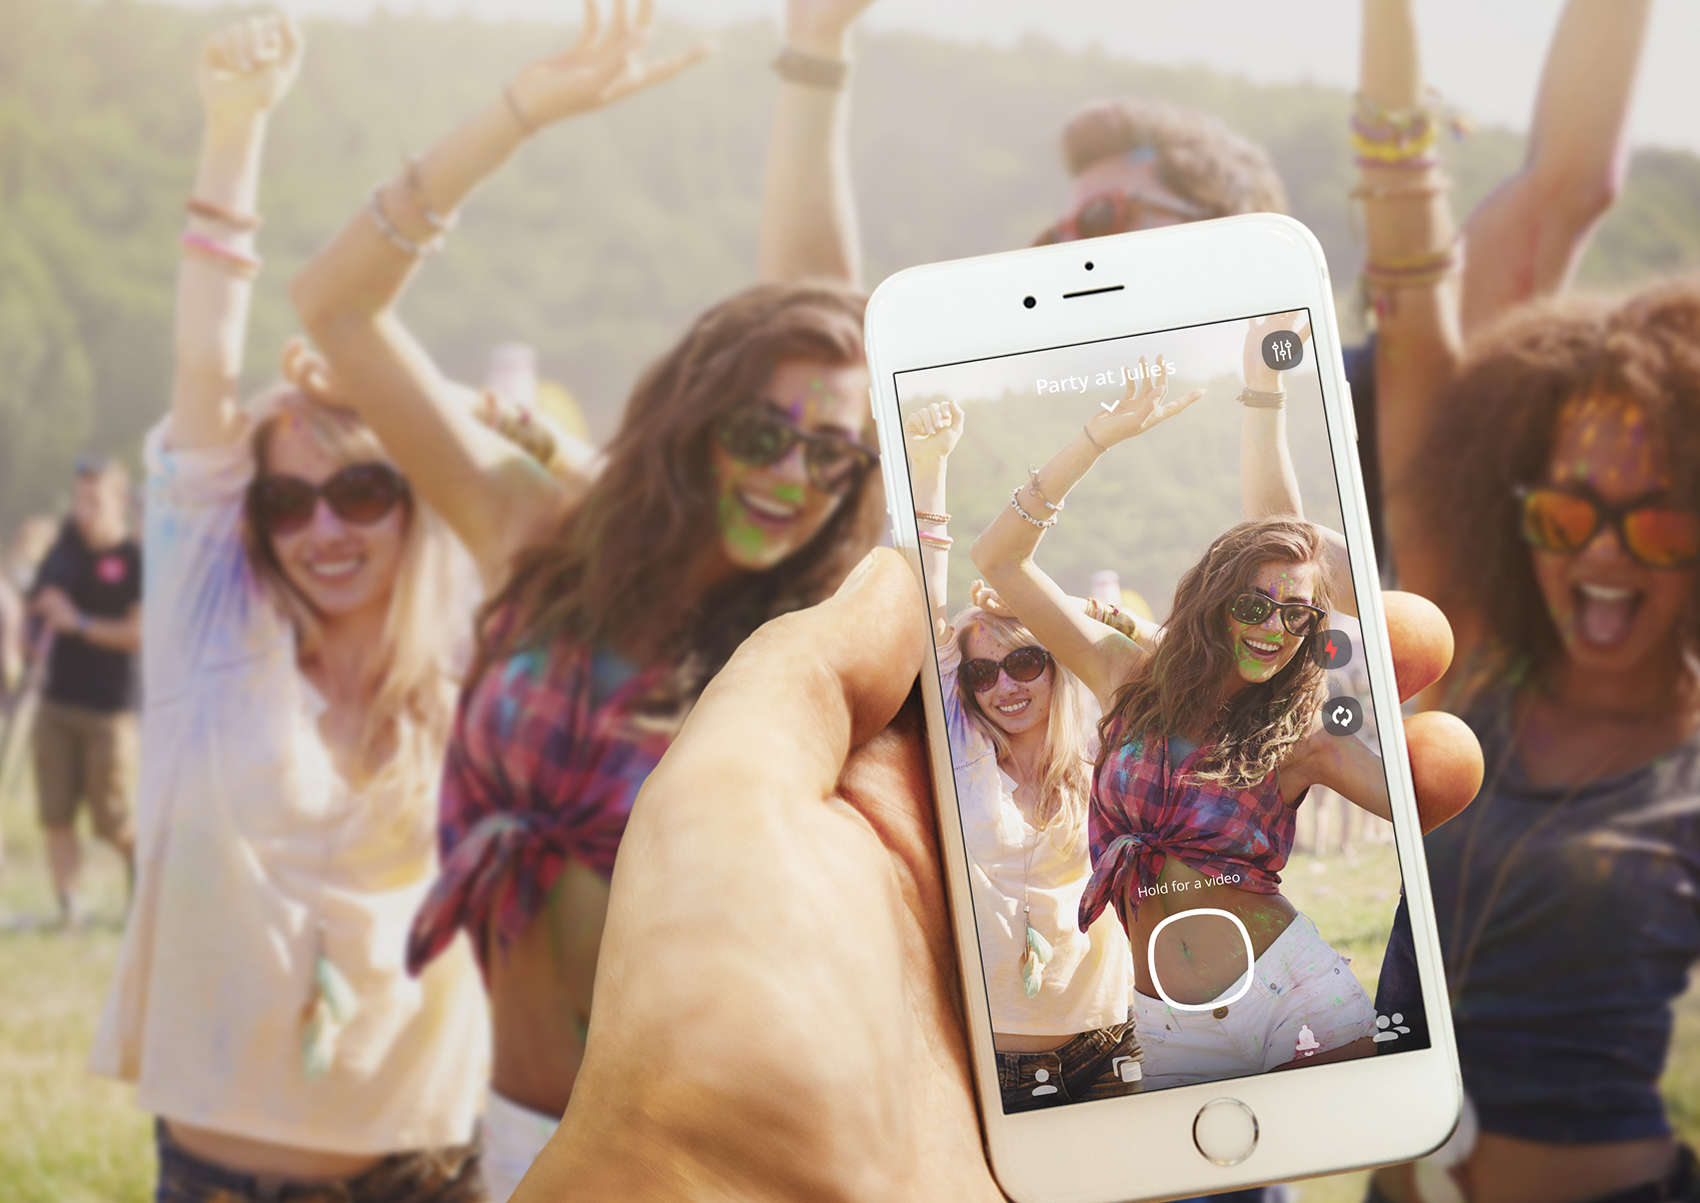 Flashgap lets you take pictures at the party, but then makes you wait a day before you can share them.